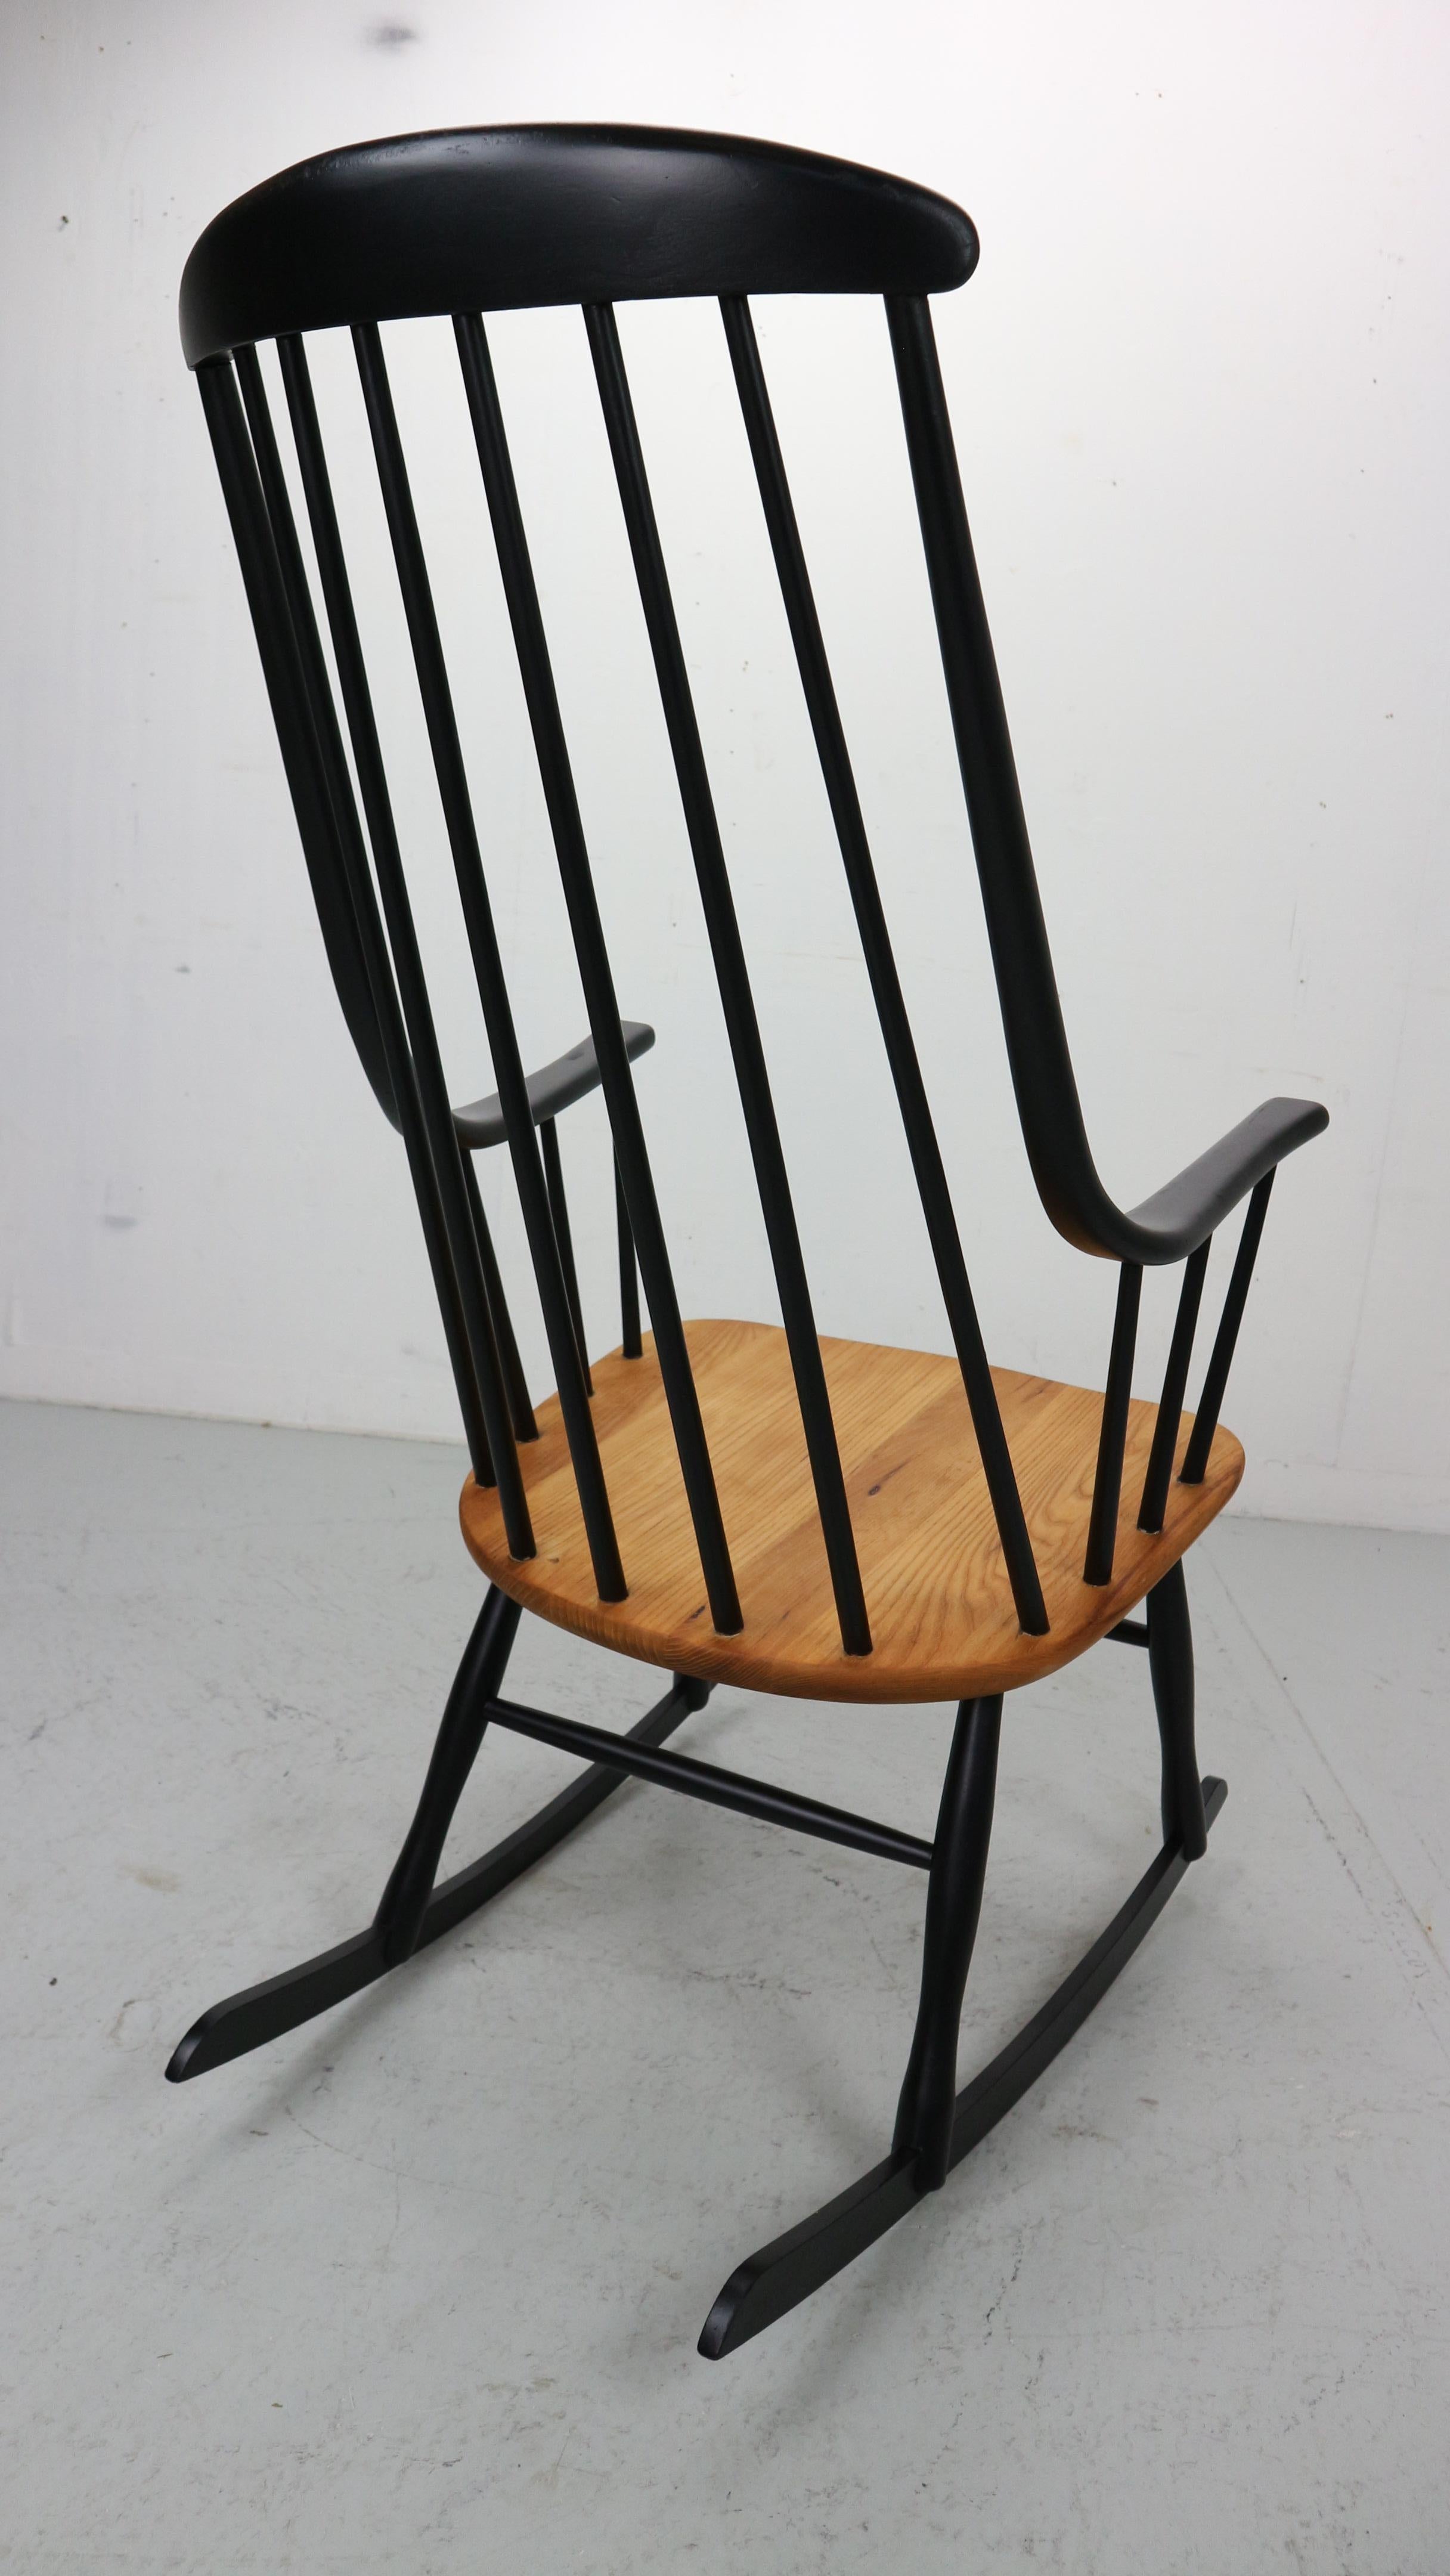 20th Century Lena Larsson, made by Nesto, a mid century rockingchair with sculptural arms